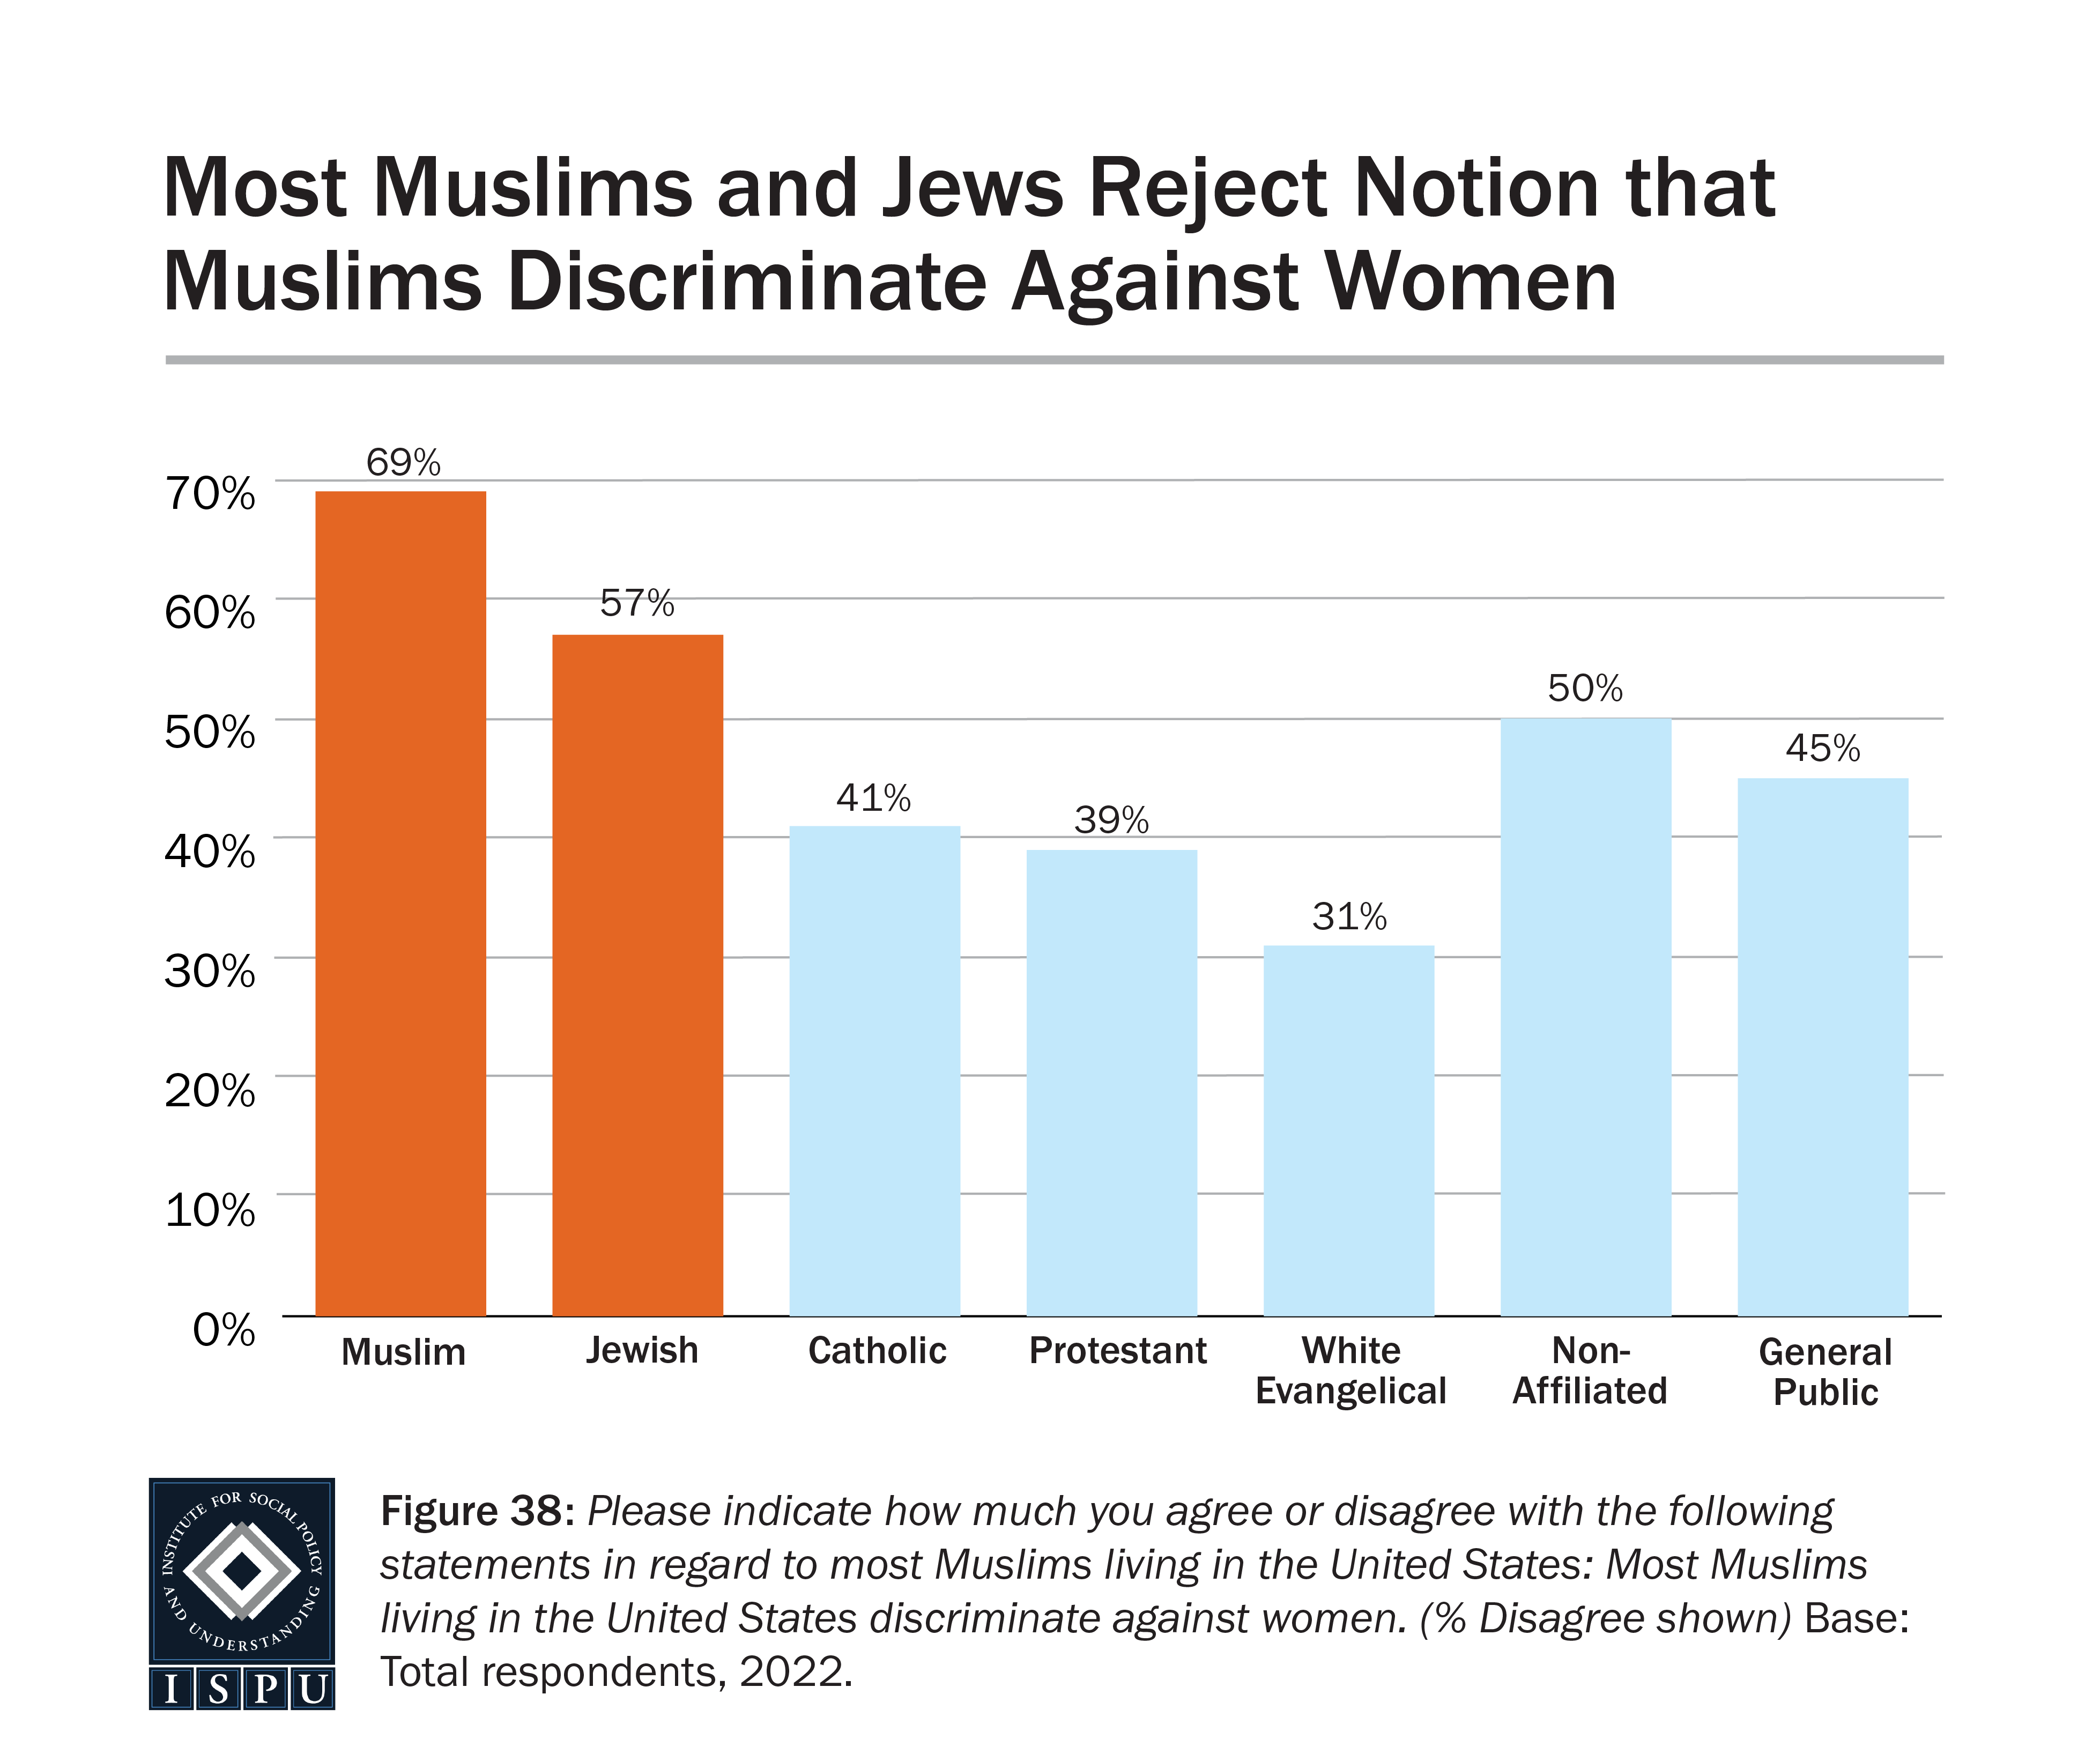 A bar graph showing the proportion of all groups surveyed who disagree with the false notion that most Muslims living in the US discriminate against women.